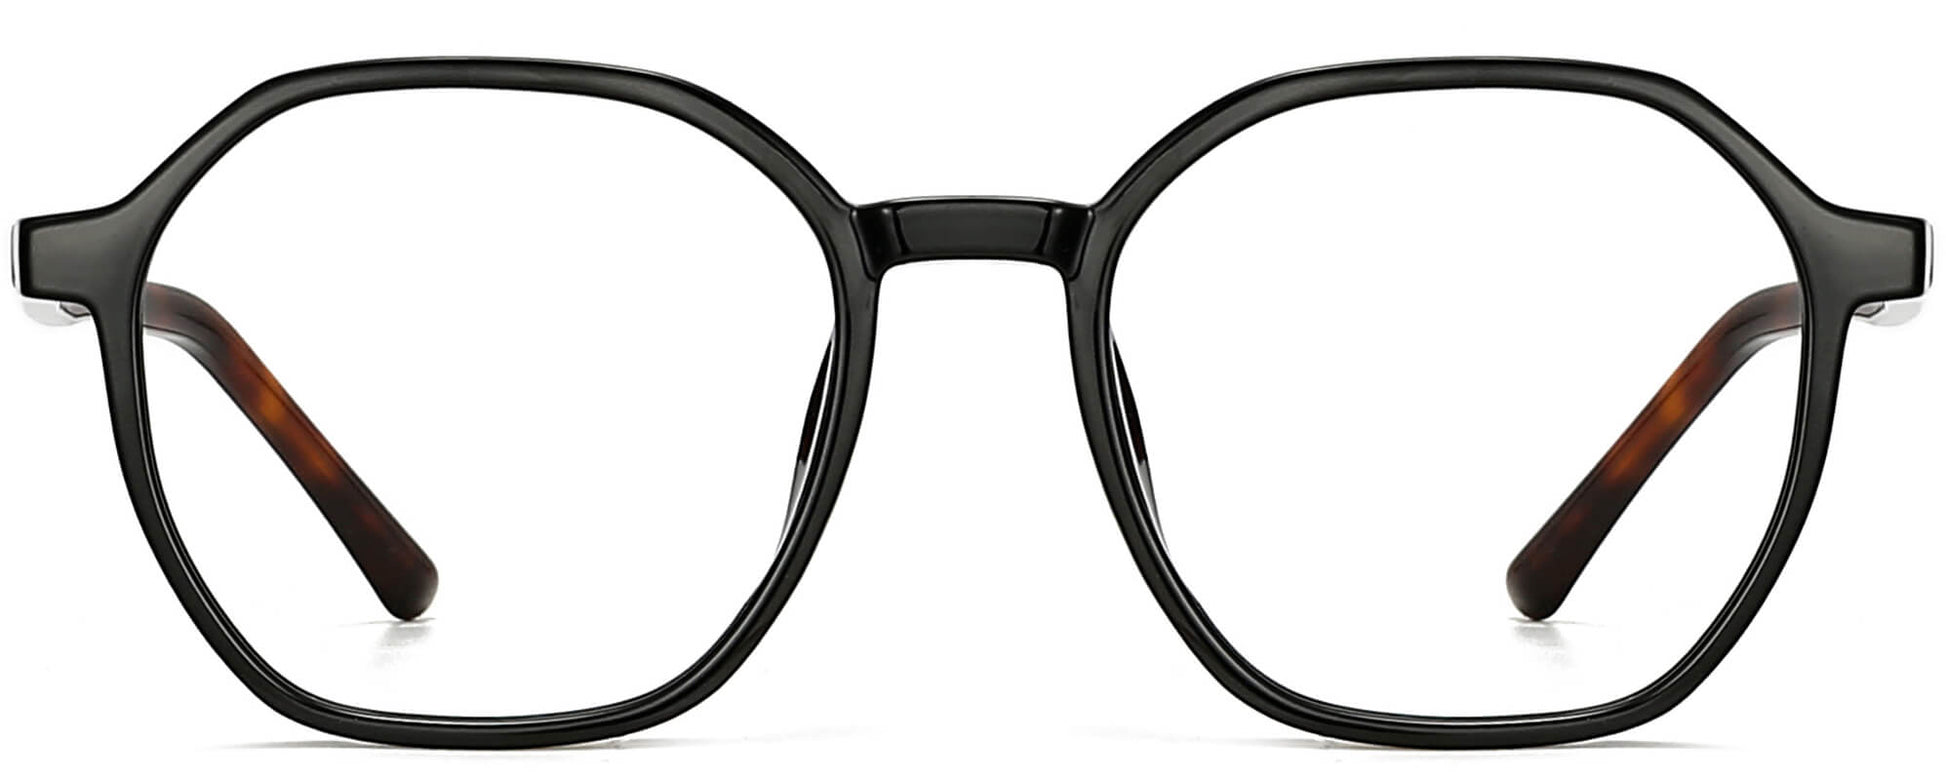 Archie Geometric Black Eyeglasses from ANRRI, front view